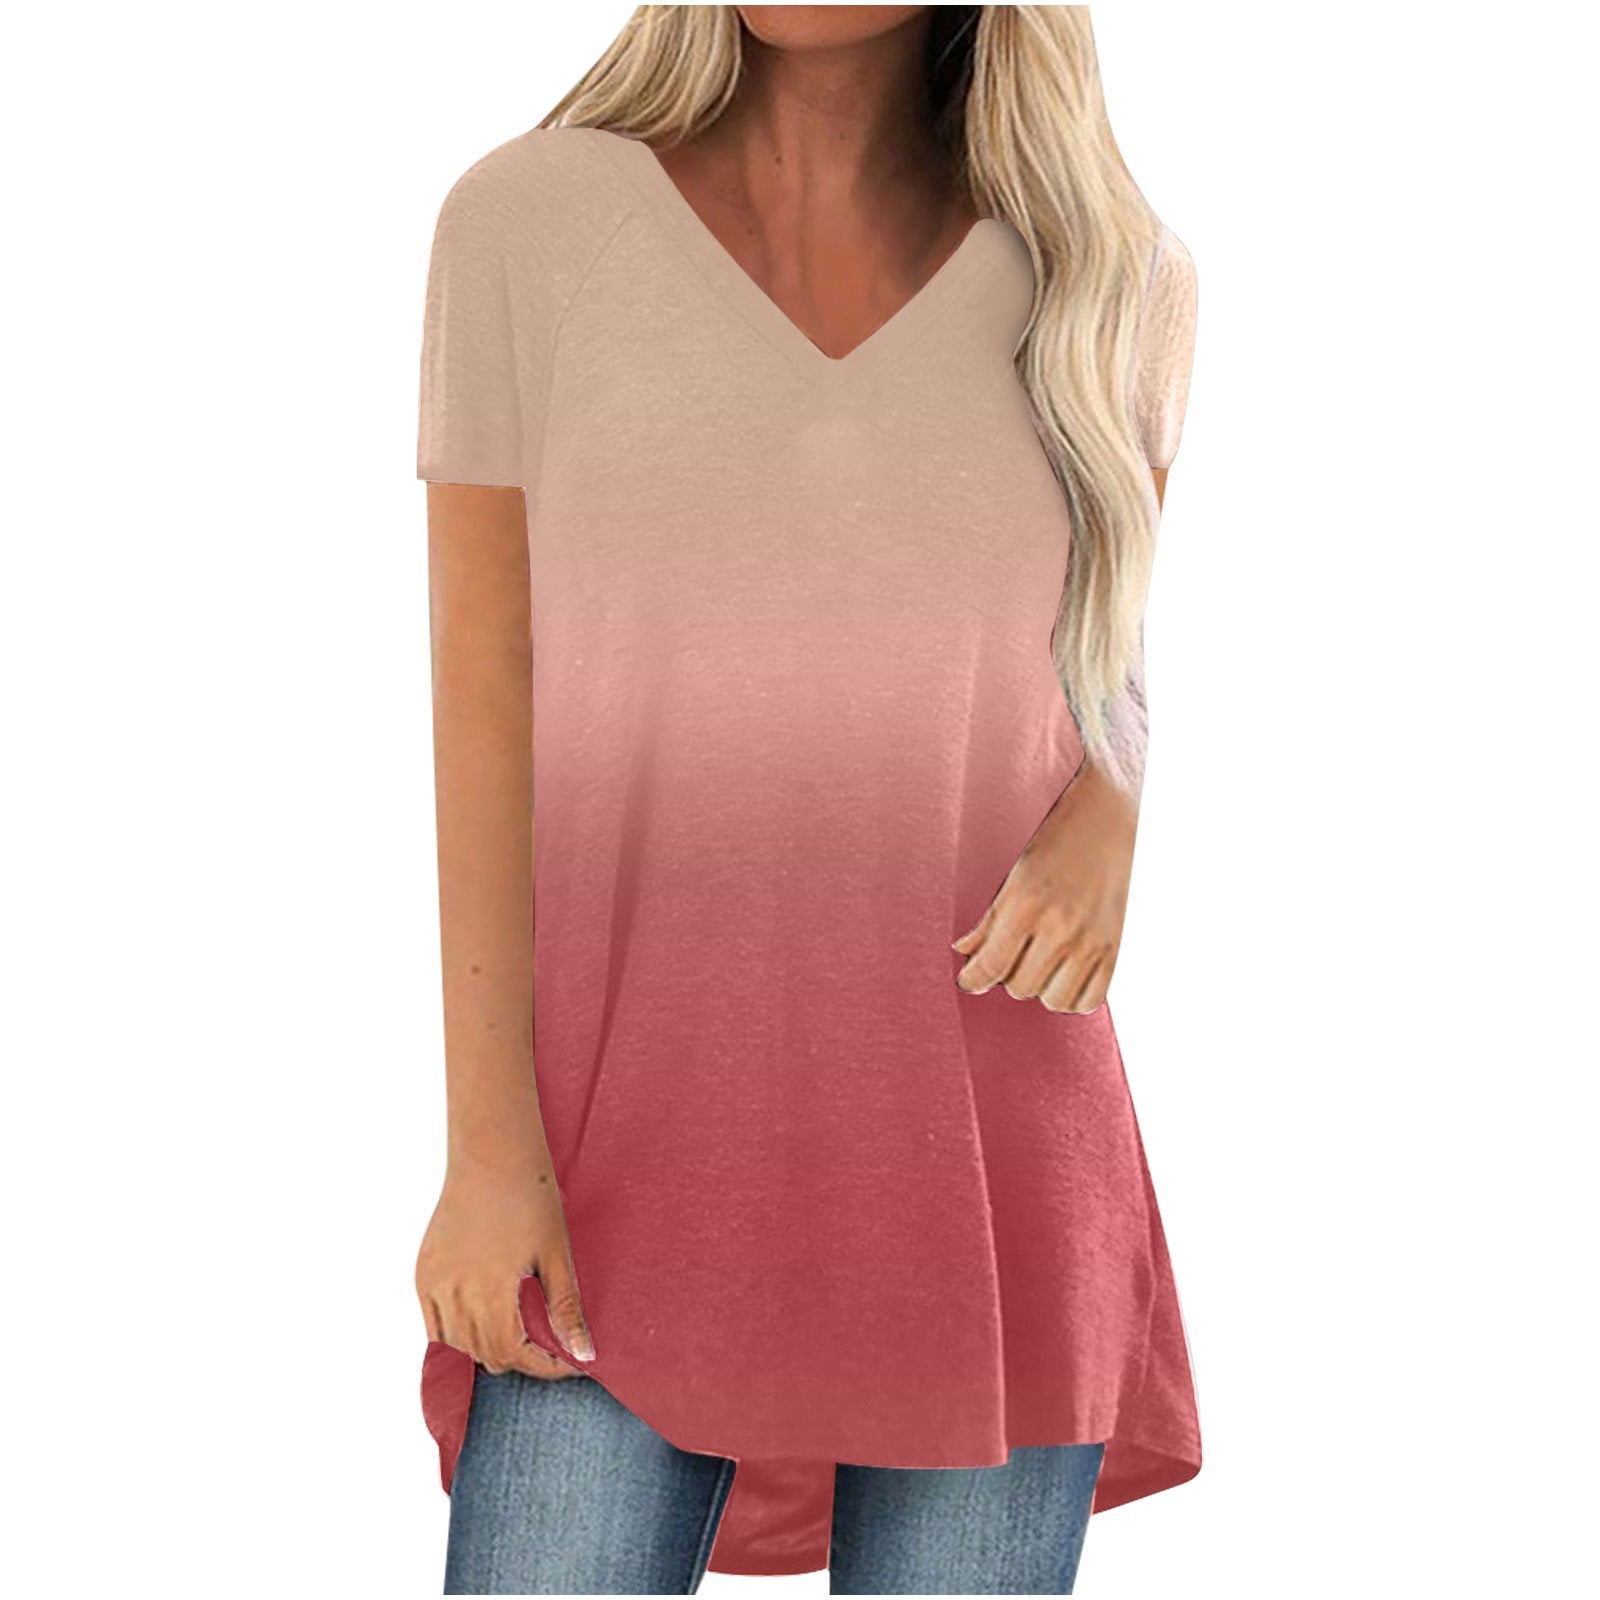 Womens Blouses and Tops Casual, Womens Long Tunics or Tops